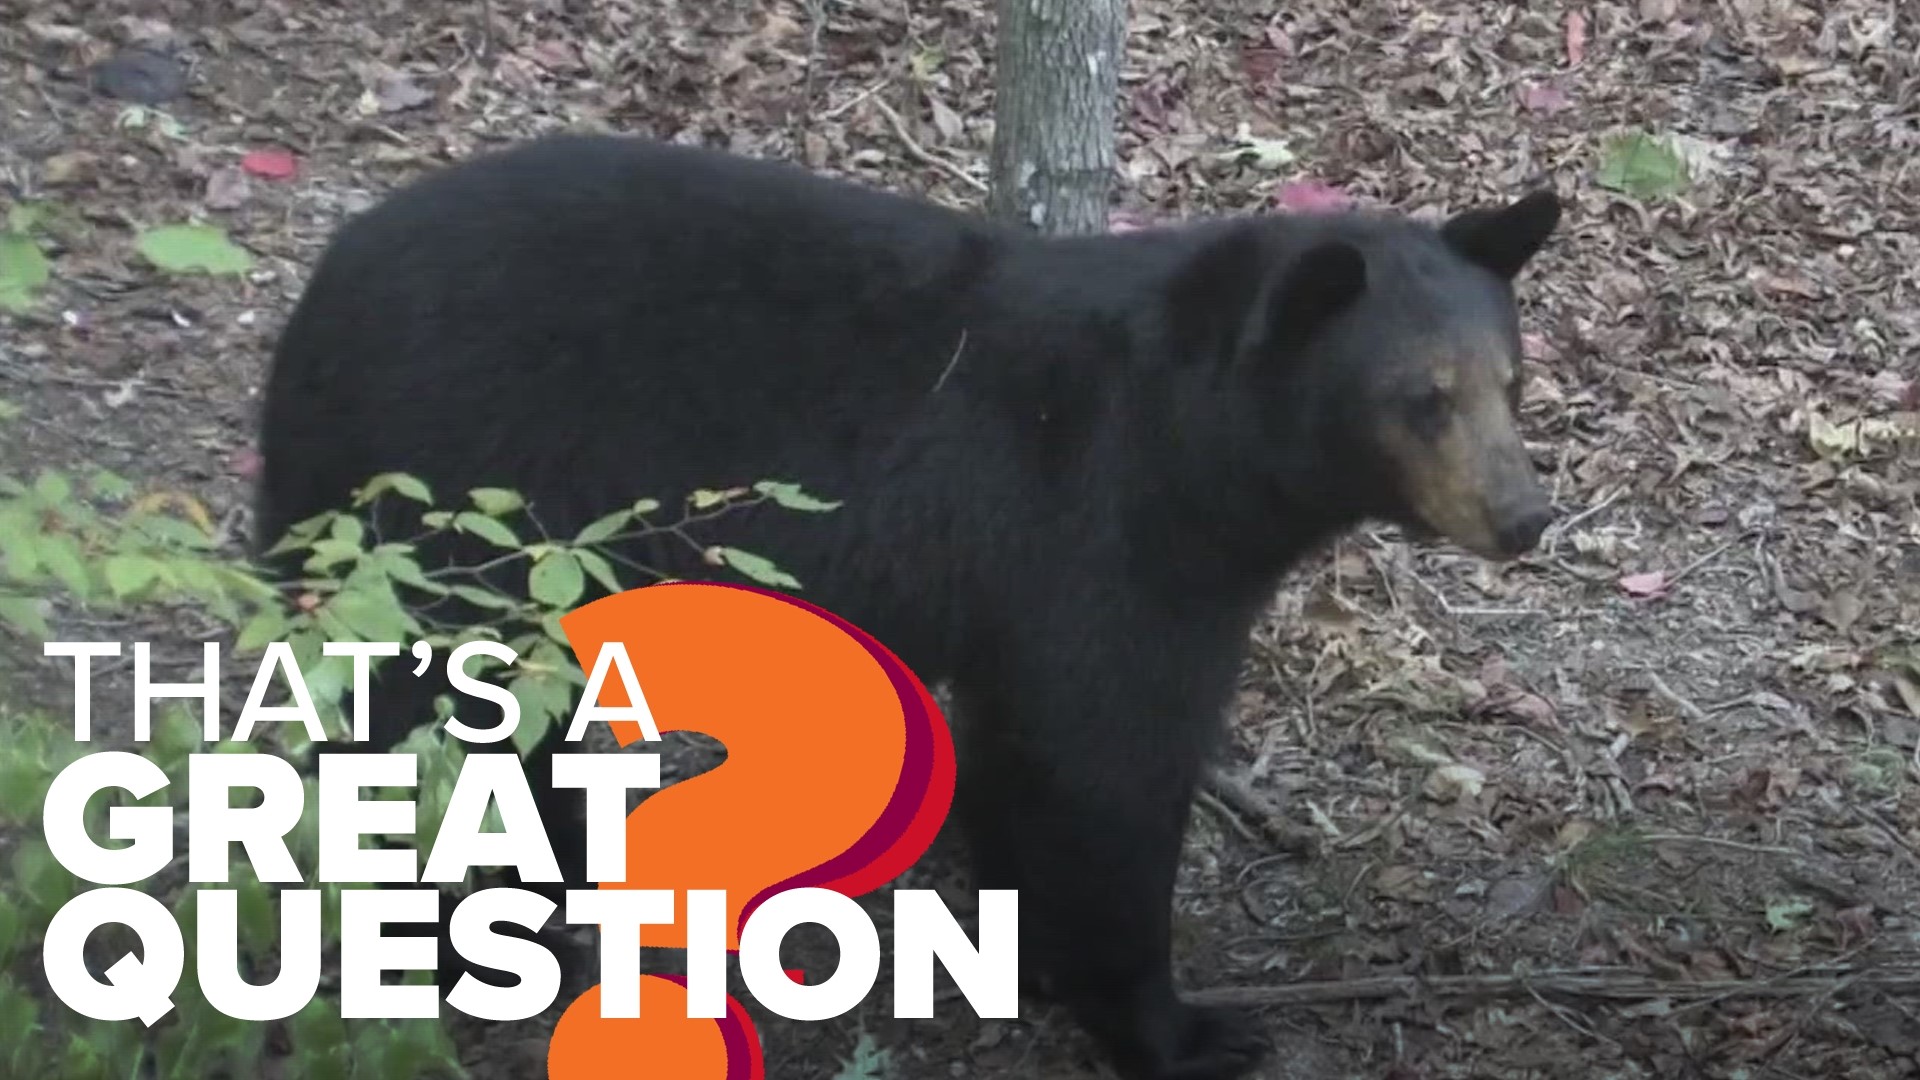 Arkansas may have seen a dip in black bear population in the past, but today, there are over 5,000 bears in the state thanks to the Black Bear Restoration Program.